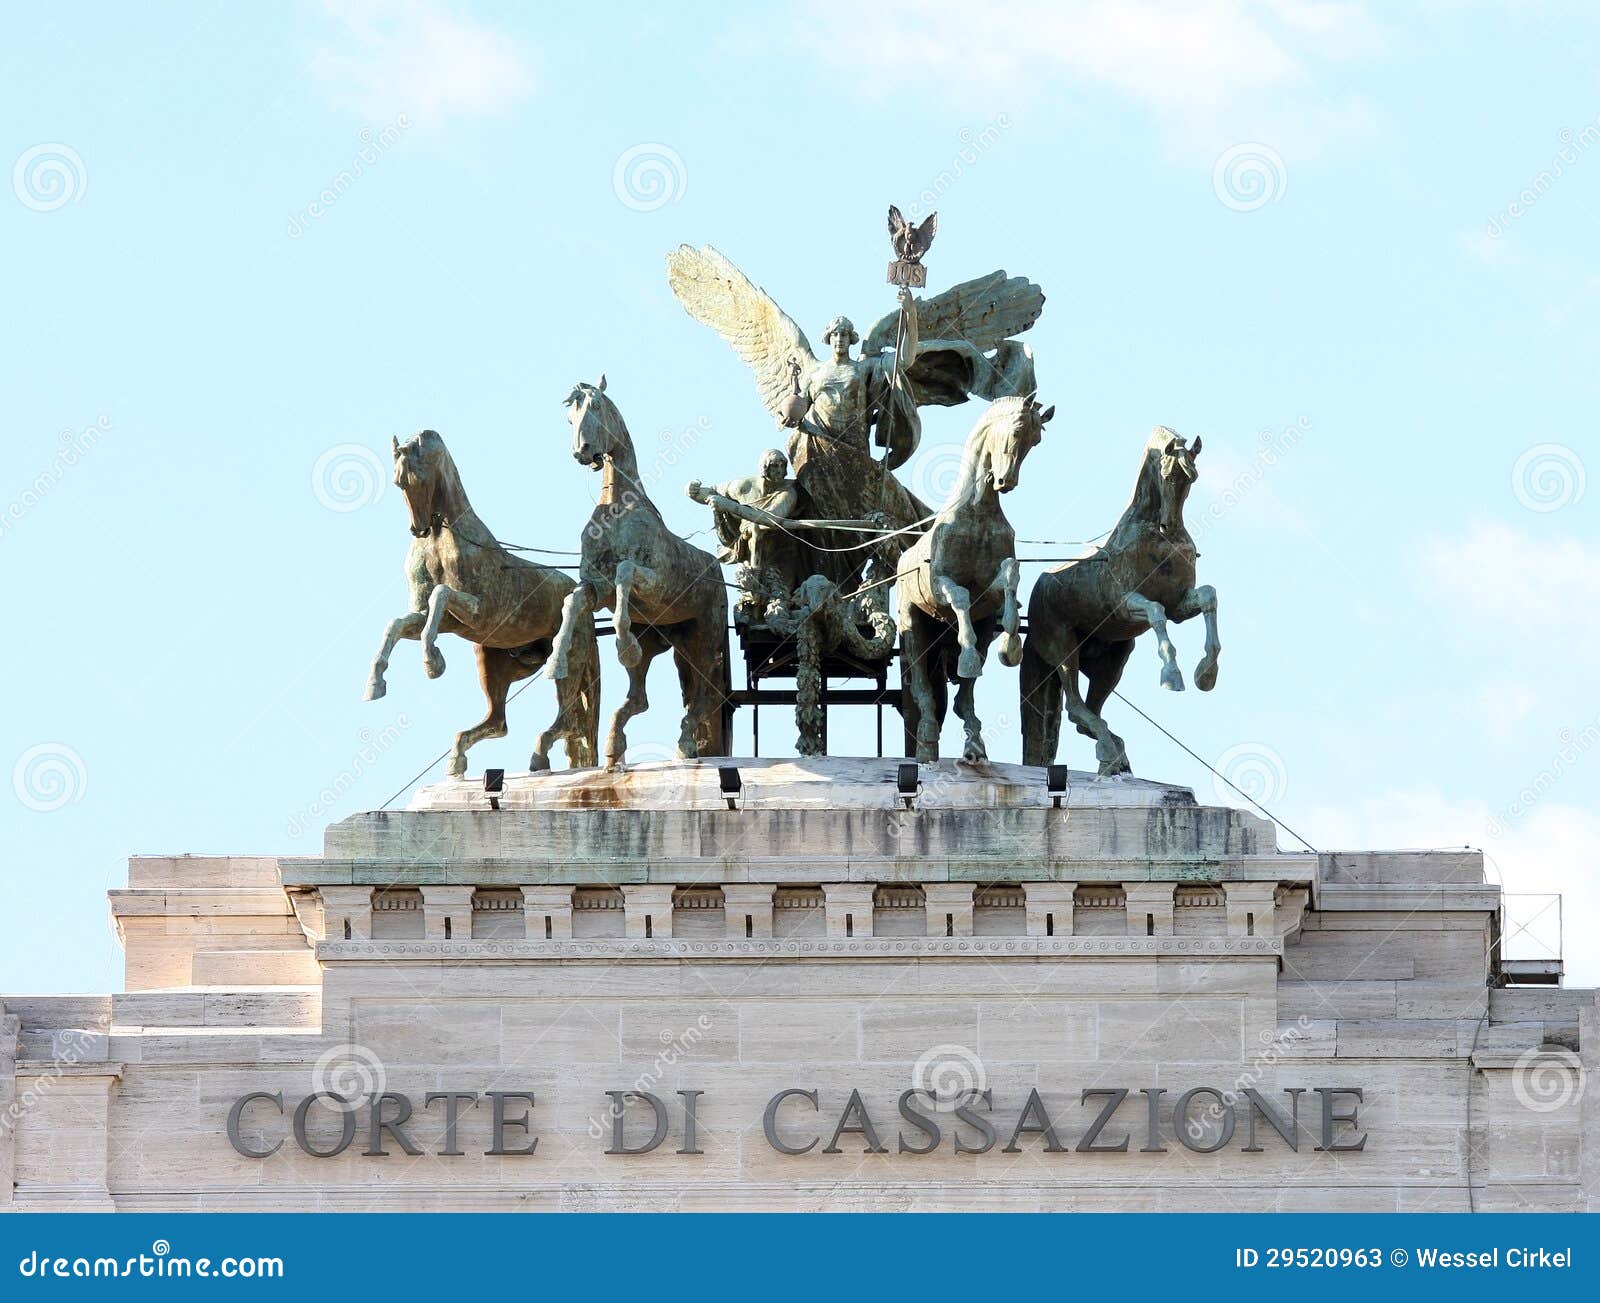 quadriga upon palace of justice in rome, italy